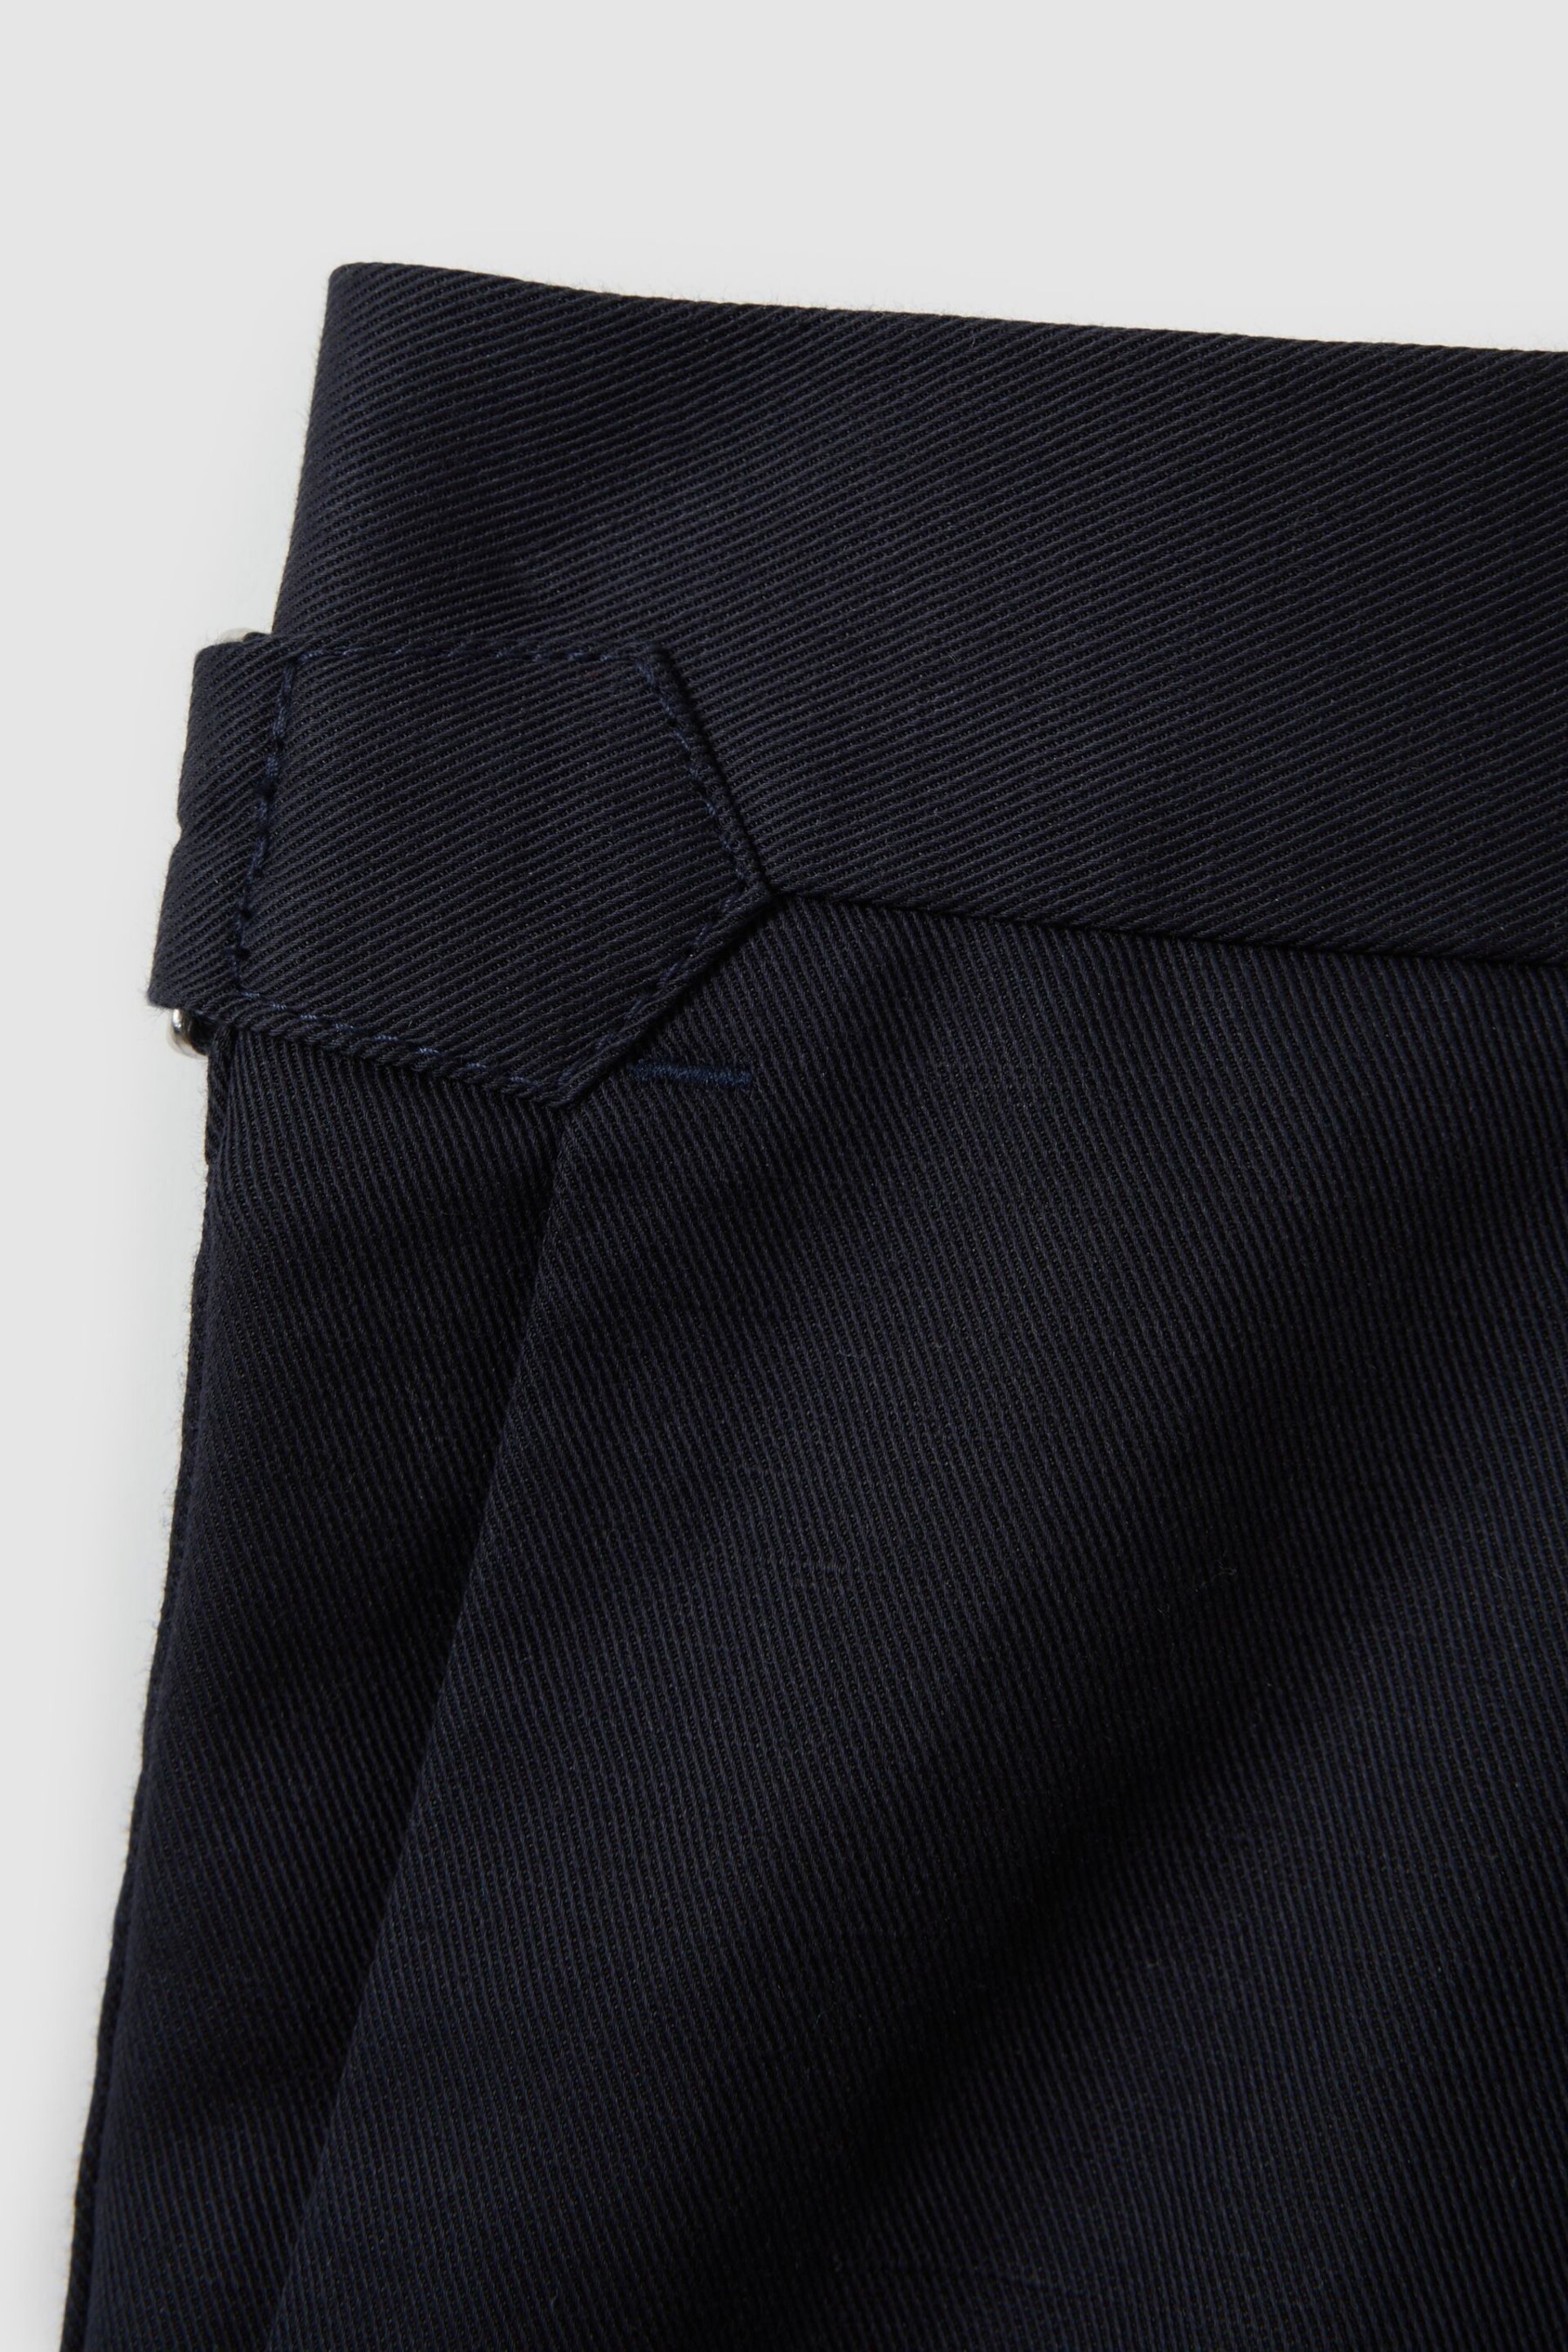 Reiss Navy Con Cotton Blend Adjuster Shorts - Image 5 of 5